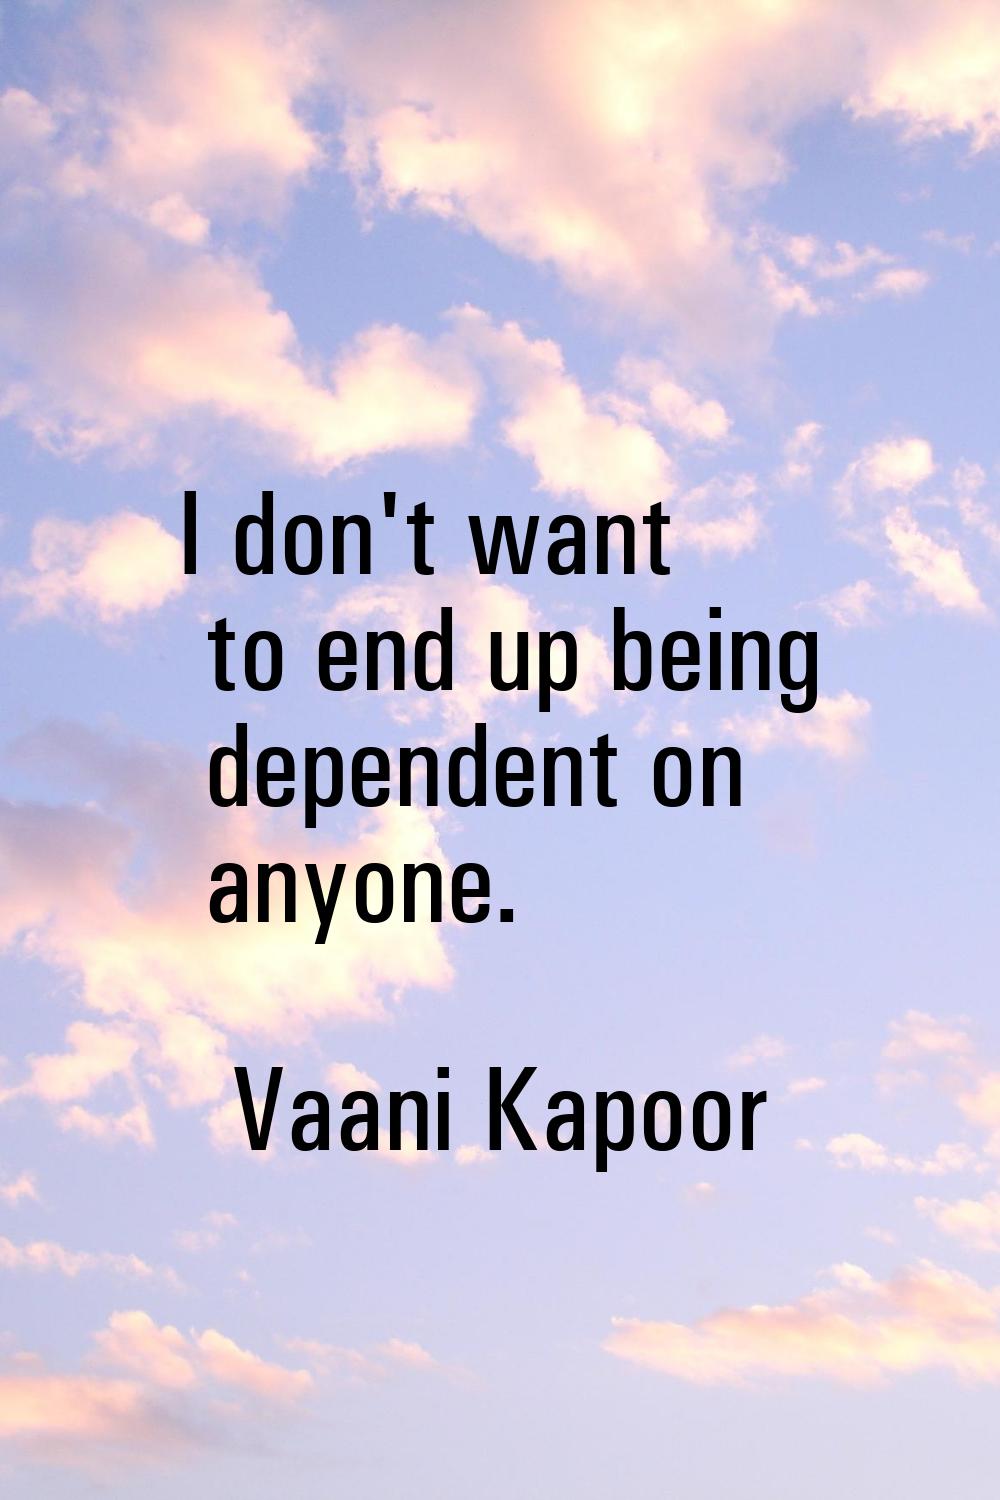 I don't want to end up being dependent on anyone.